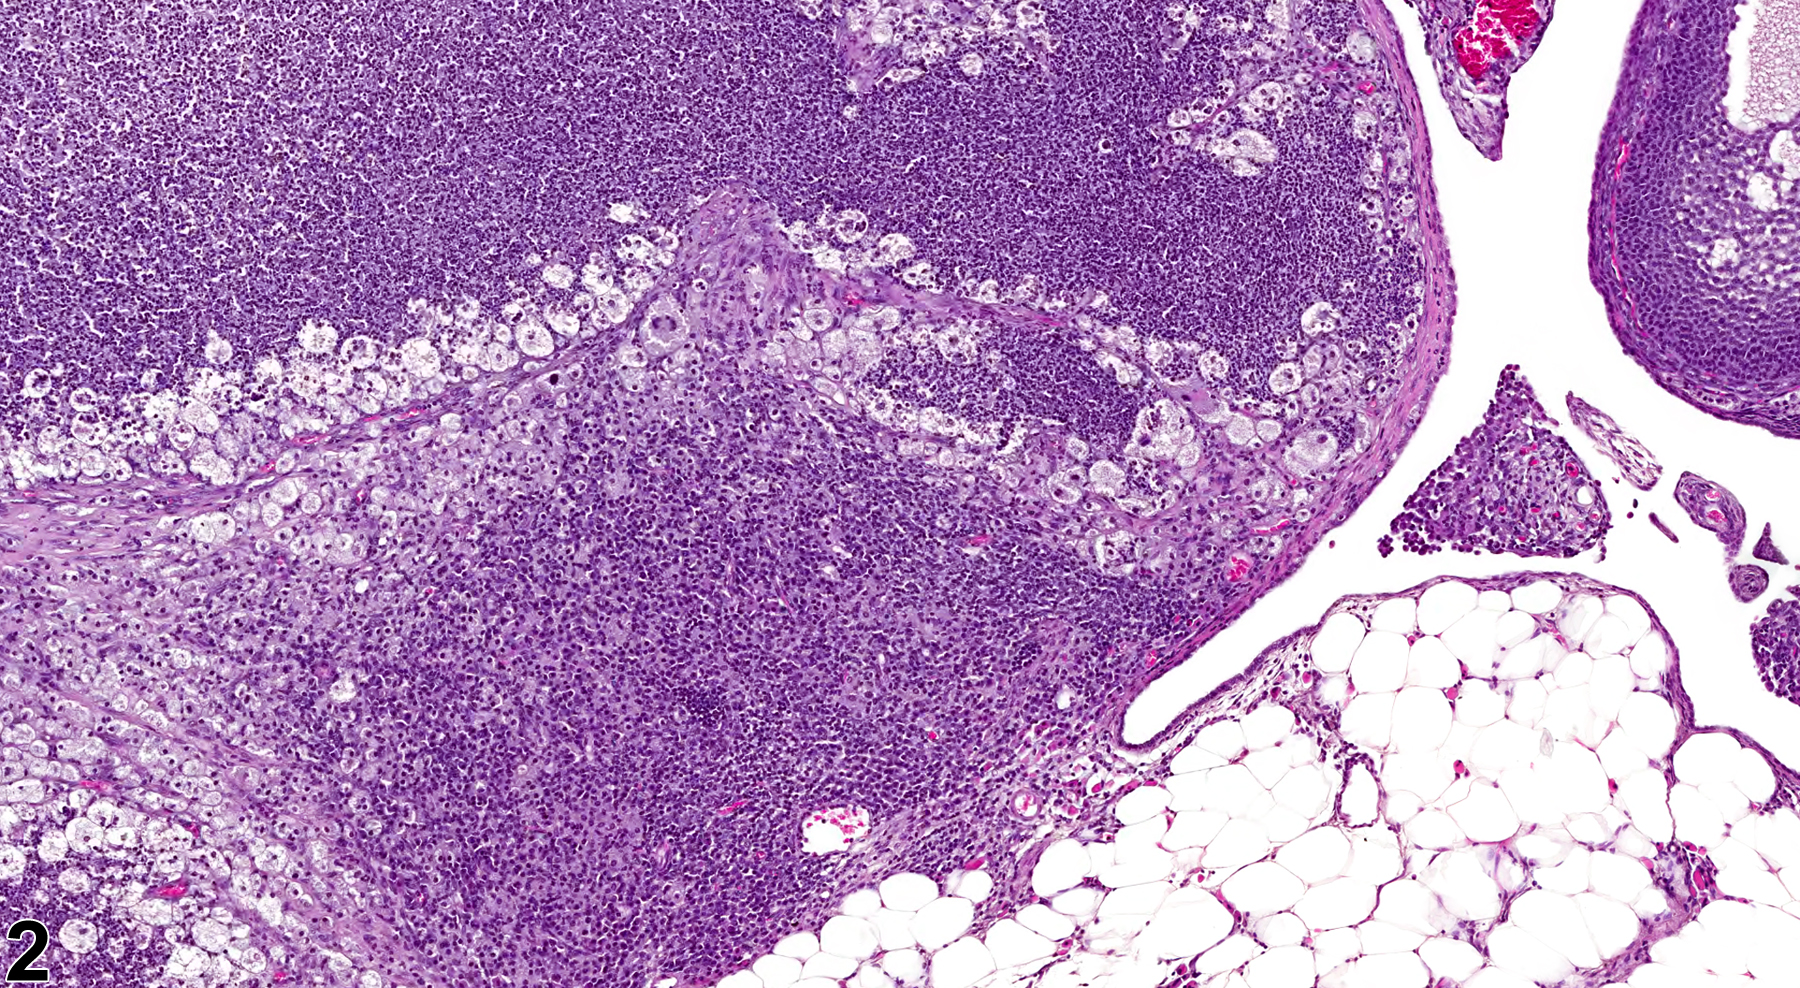 Image of inflammation, suppurative in the ovary from a female B6C3F1 mouse in a chronic study